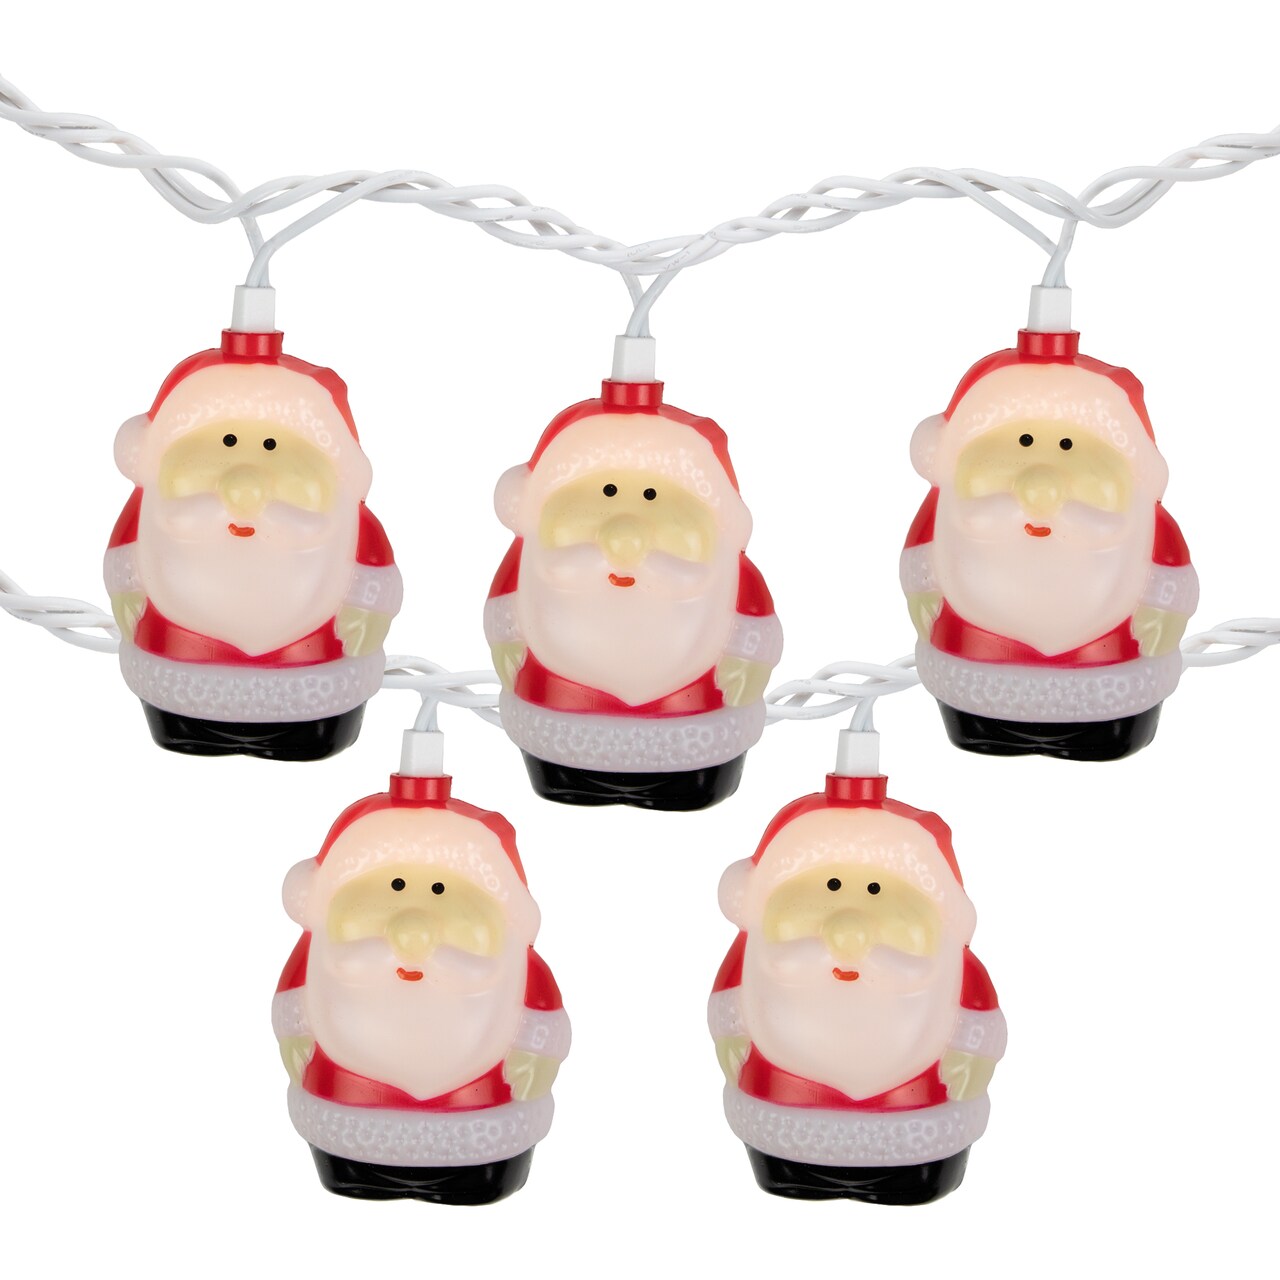 Northlight 10-Count Santa Claus Christmas Light Set, 6ft Green Wire